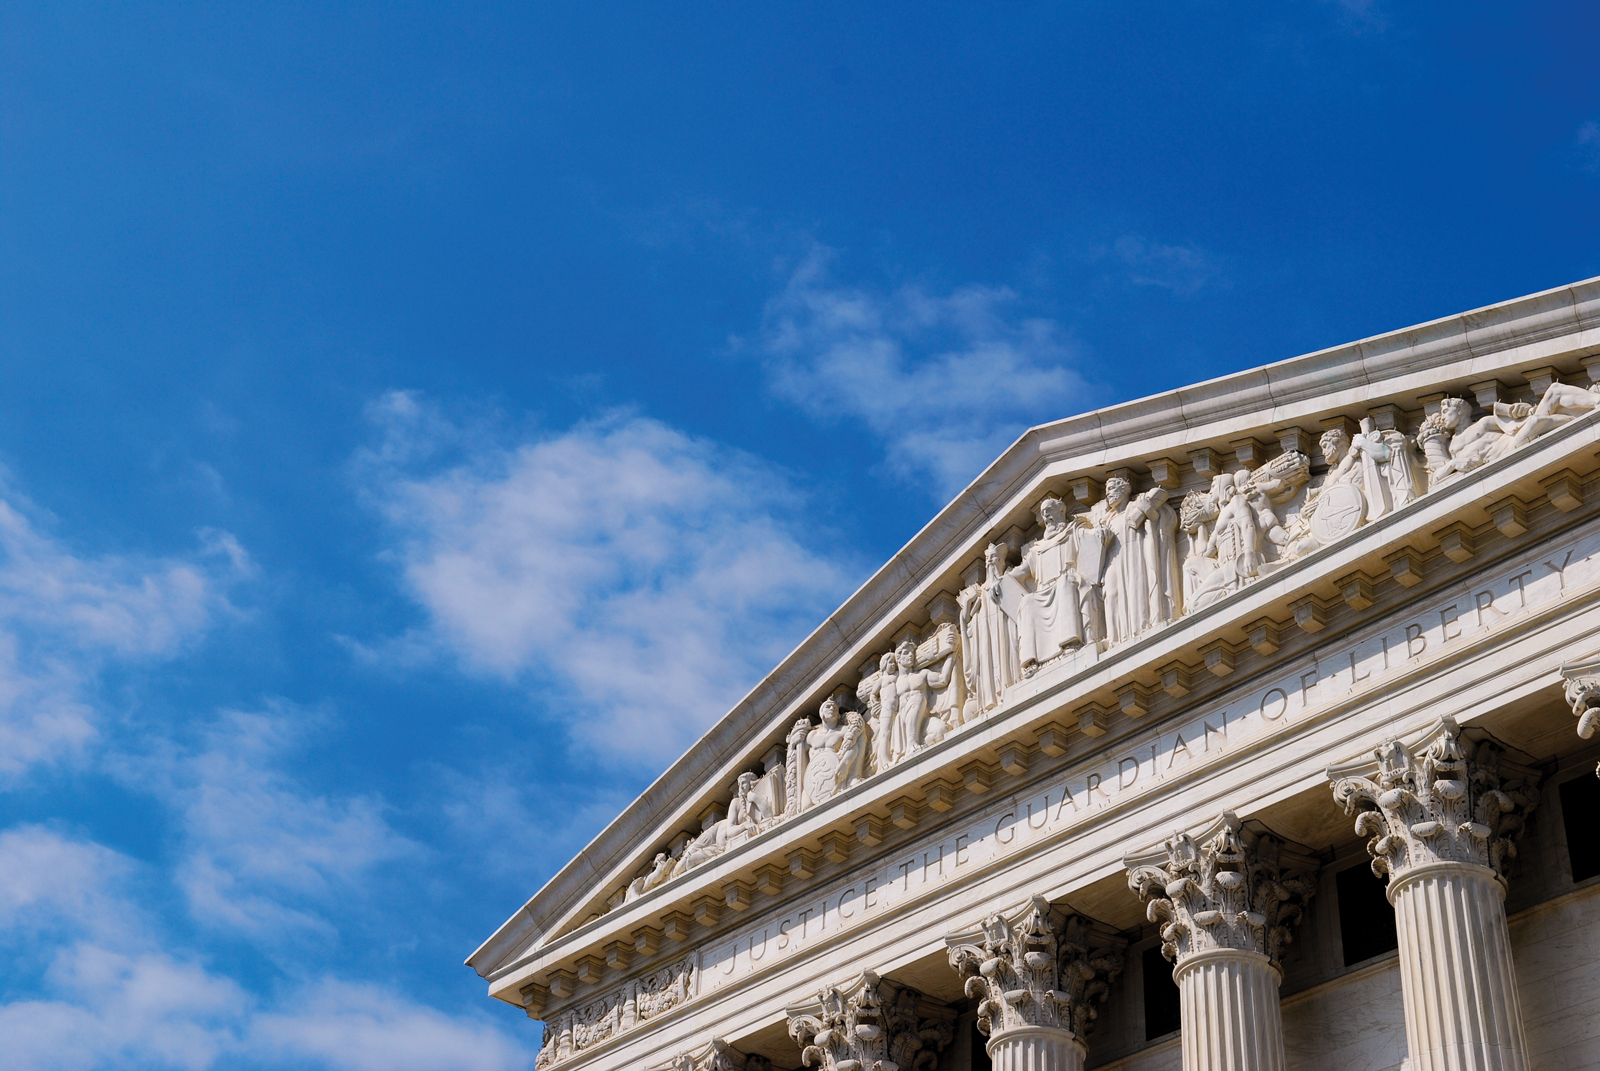 A view of the top of the building that houses the U.S. Supreme Court in Washington, DC, with blue sky behind.